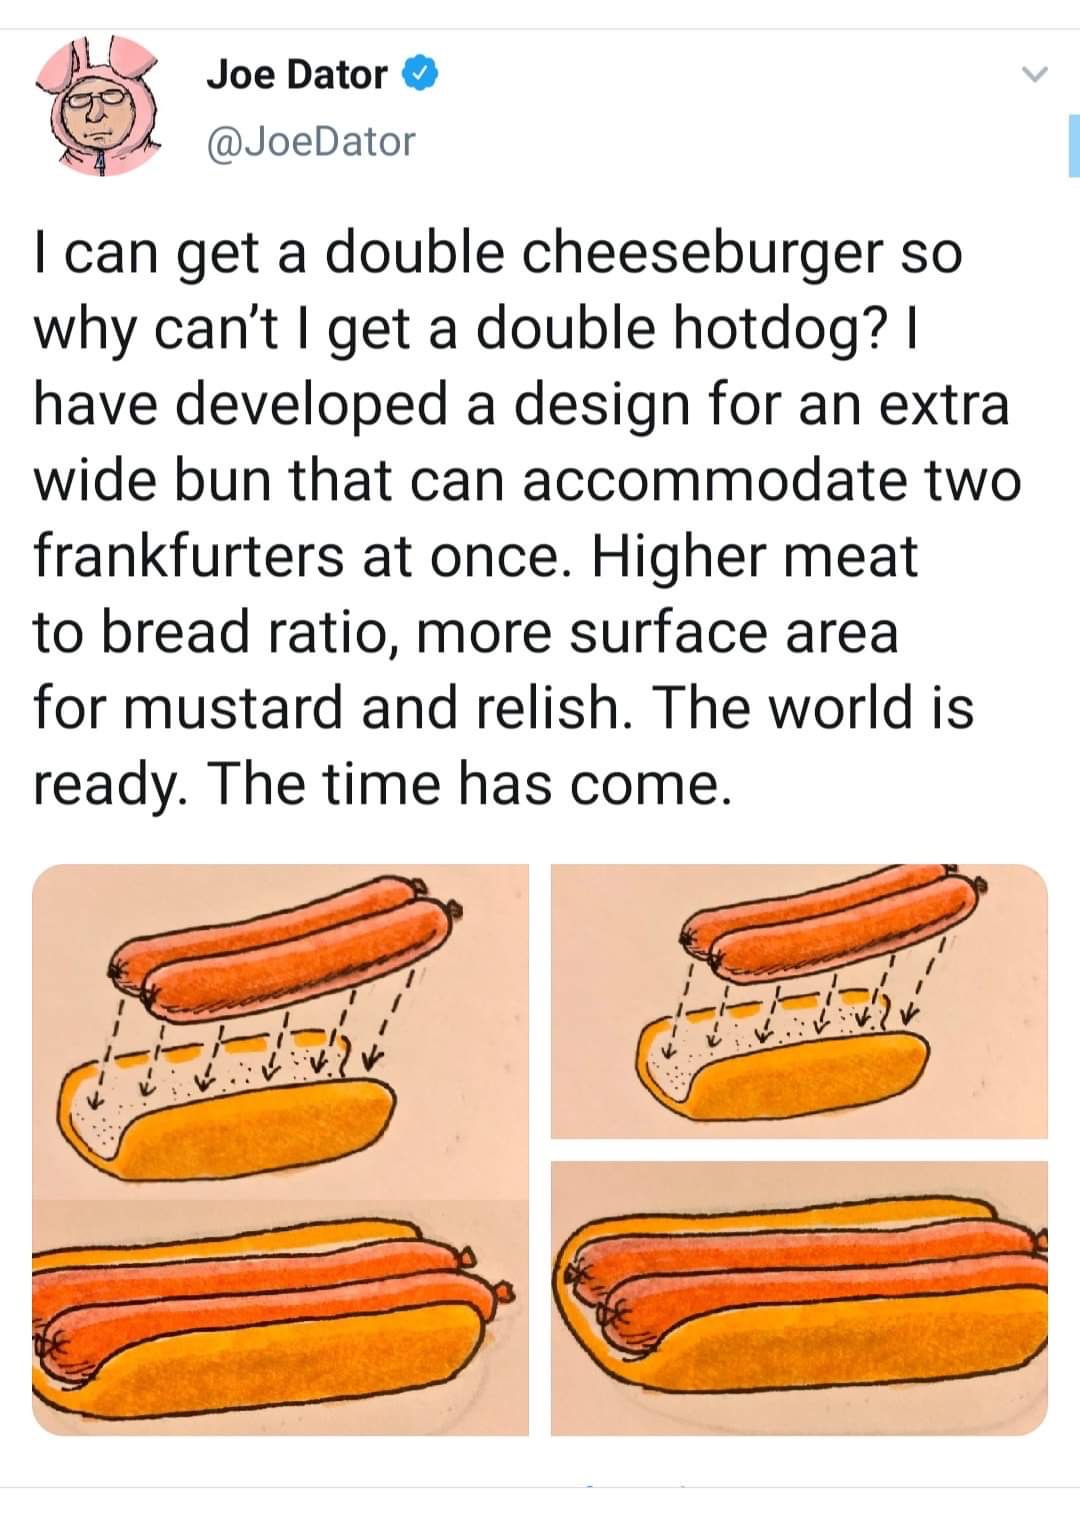 chick fil a sandwich vs popeyes meme - Joe Dator I can get a double cheeseburger so why can't I get a double hotdog?|| have developed a design for an extra wide bun that can accommodate two frankfurters at once. Higher meat to bread ratio, more surface ar